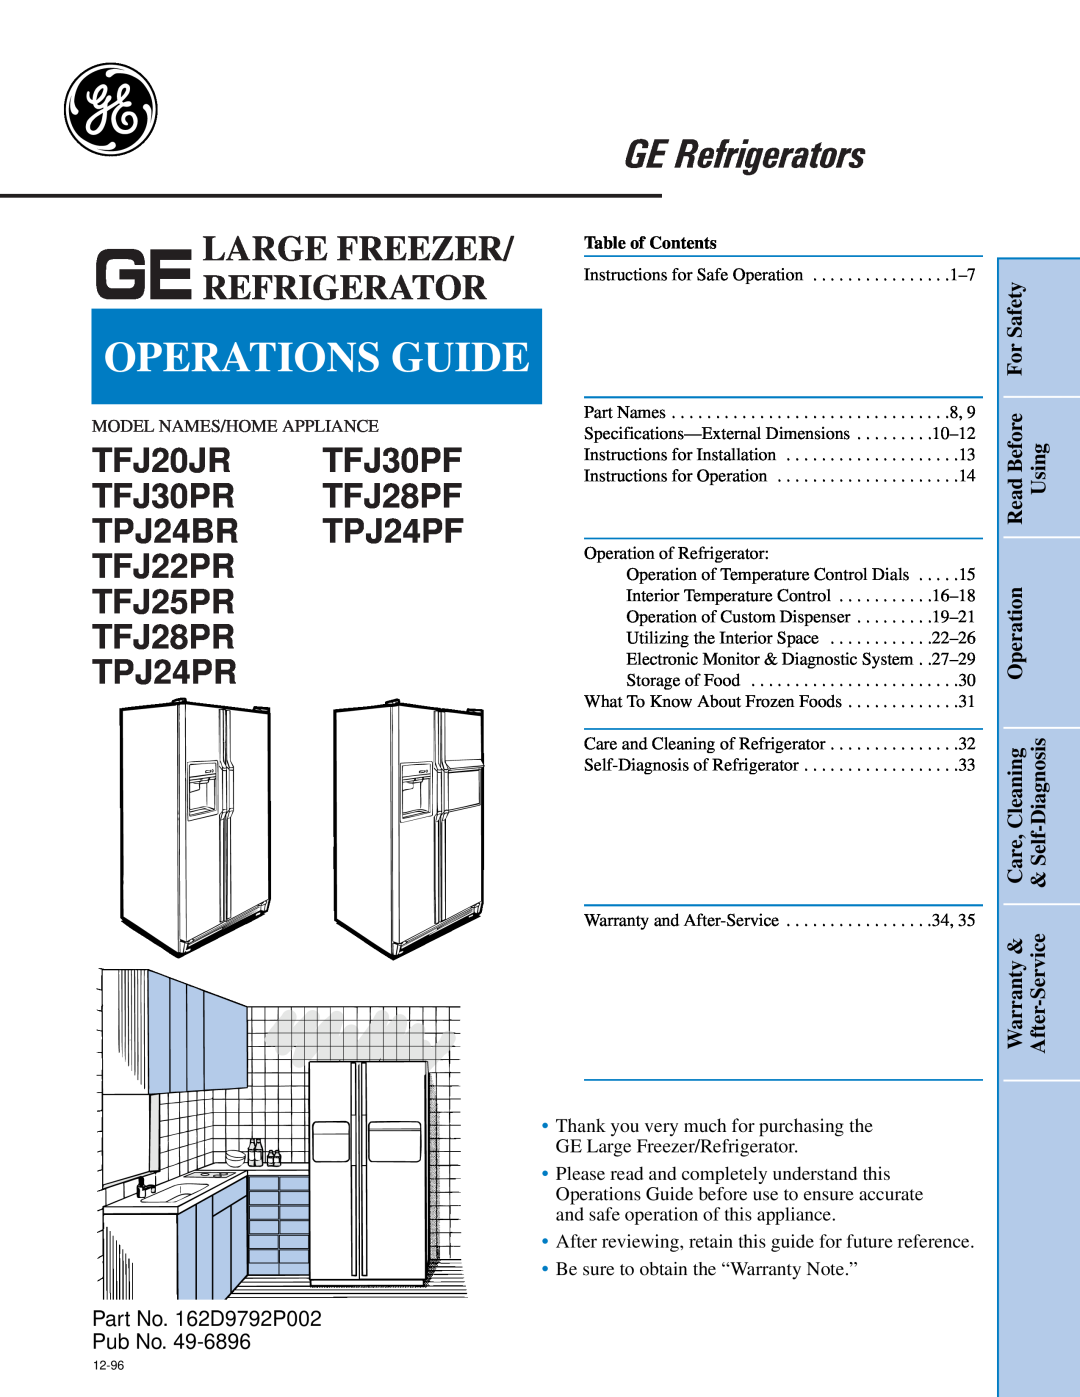 GE TPJ24BR manual Gelarge Freezer Refrigerator, For Safety, Read Before, Using, Operation, Care, Cleaning, Self-Diagnosis 